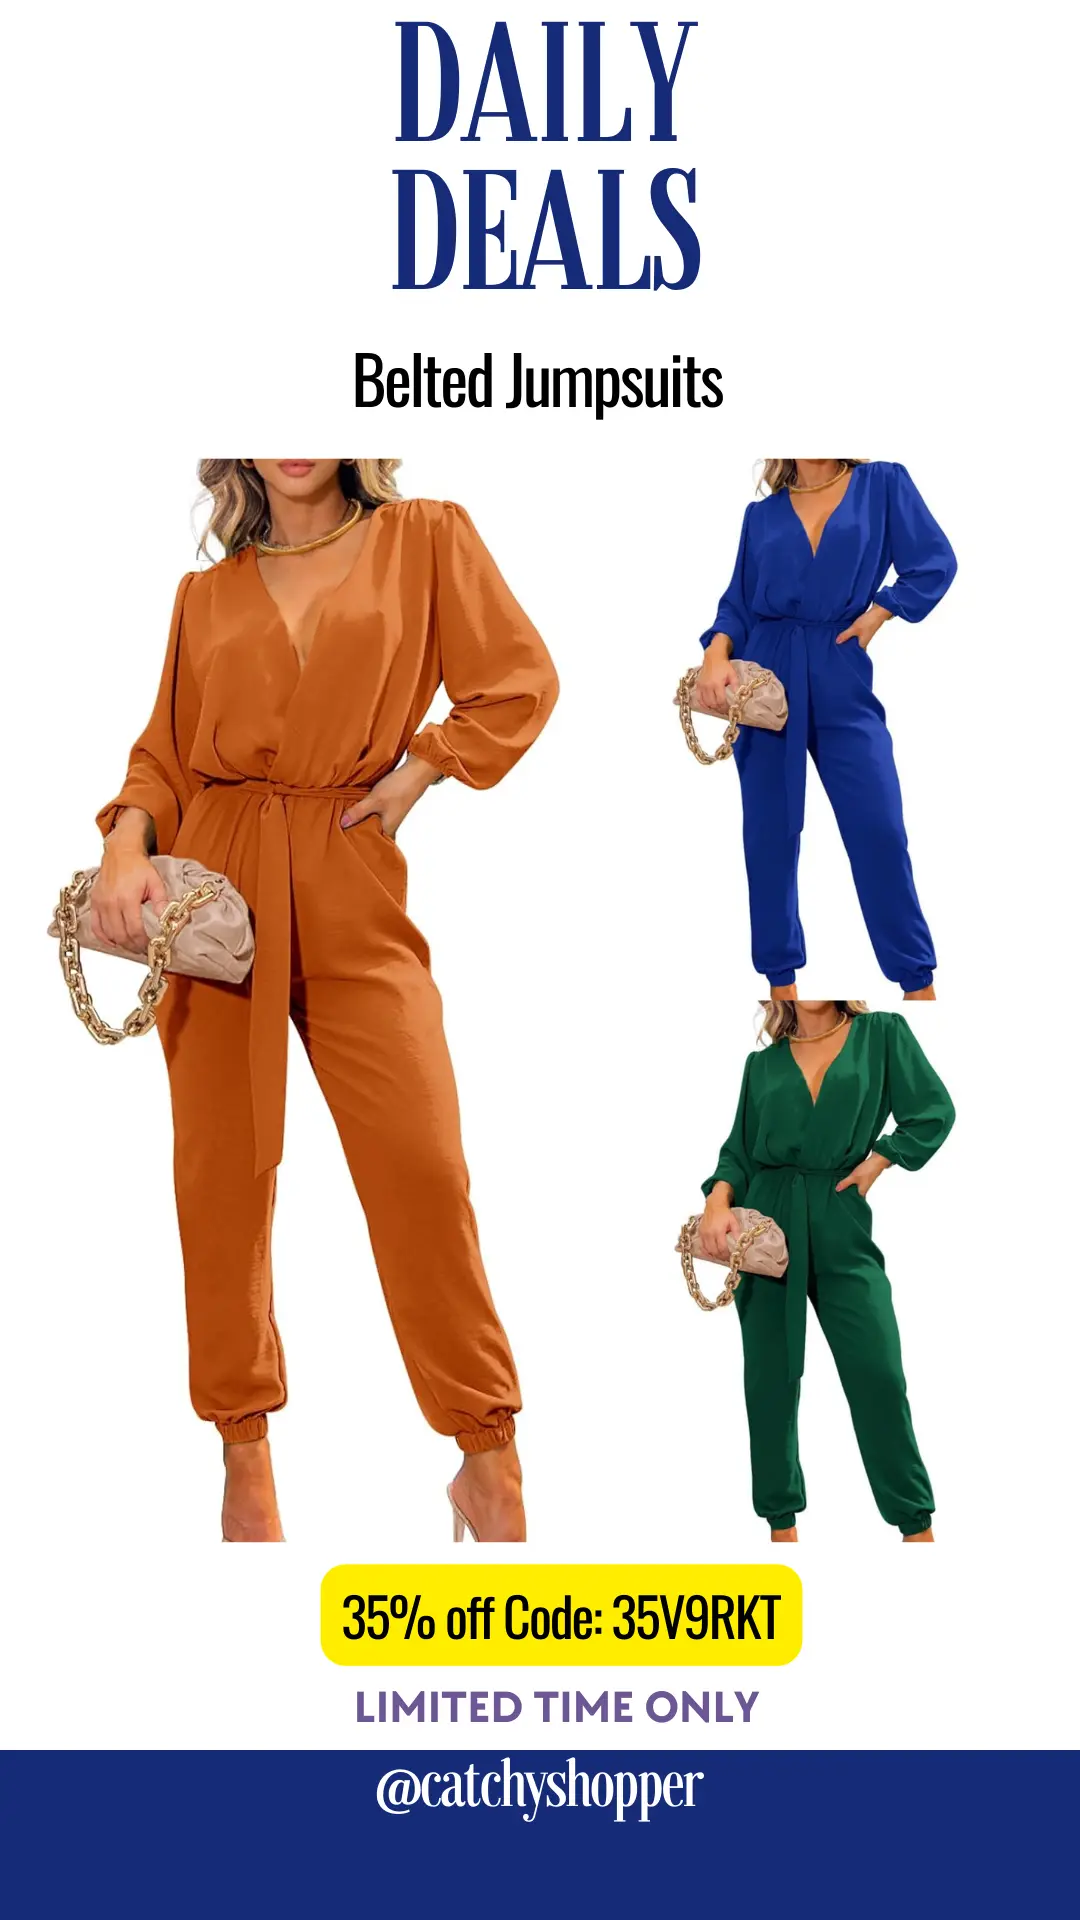 Belted Jumpsuits